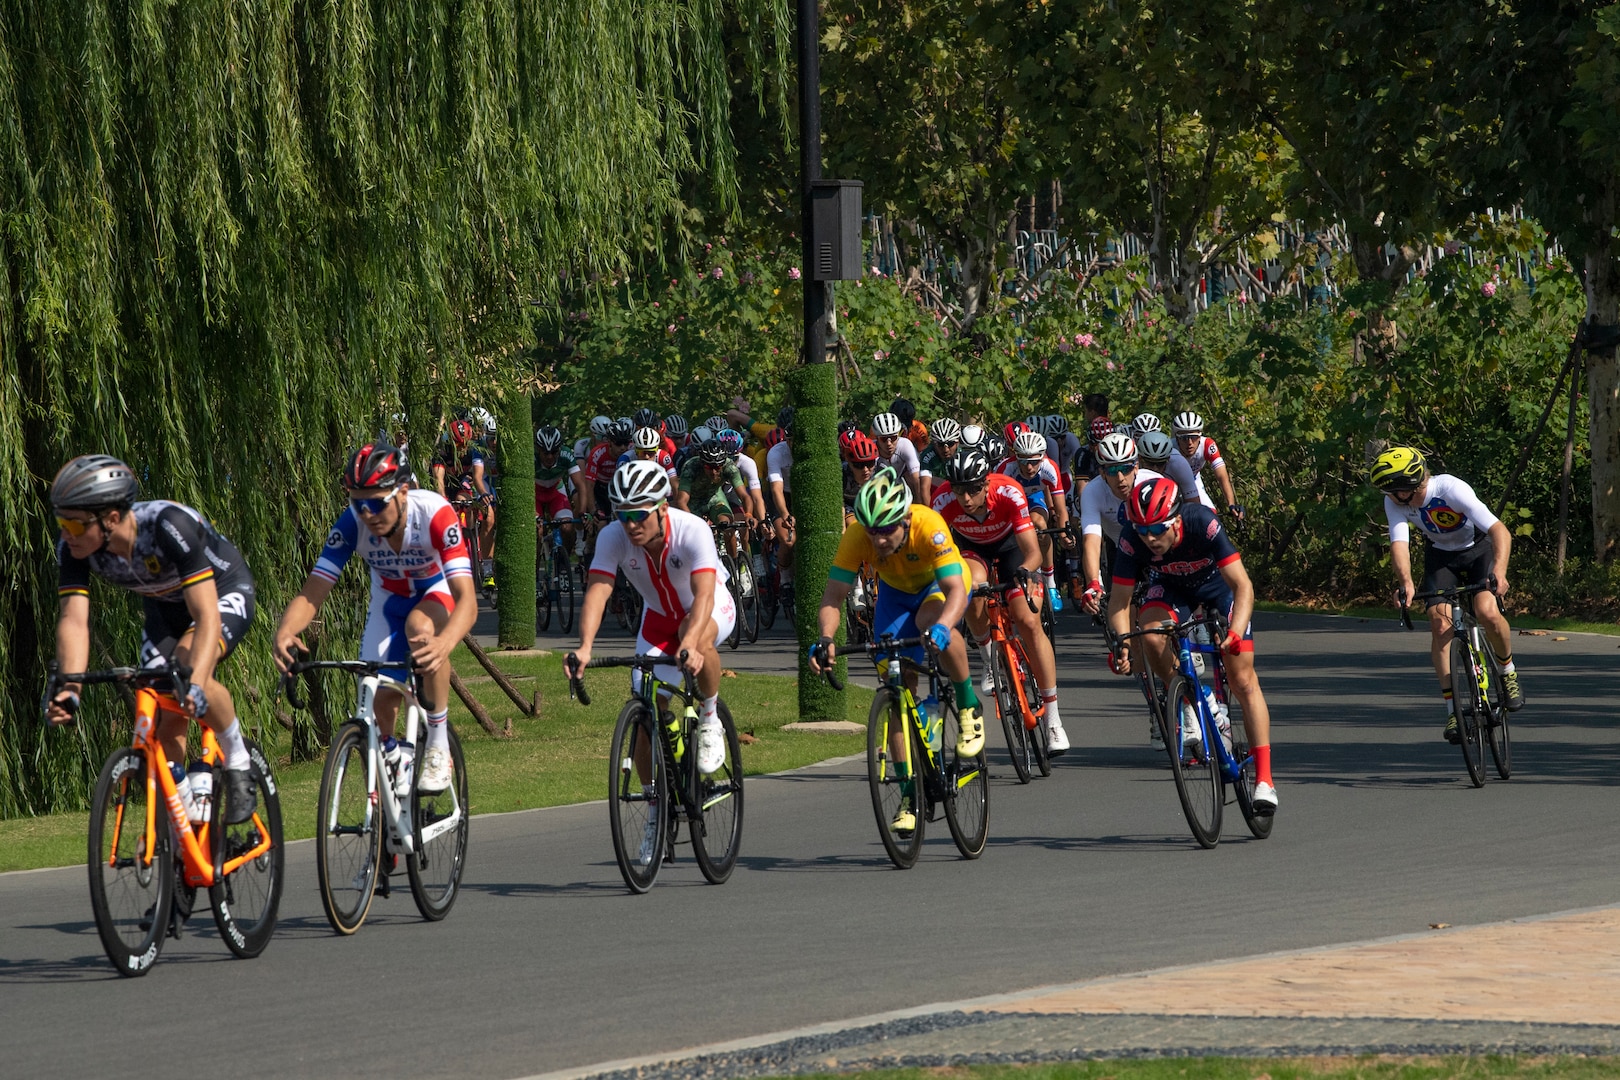 Bicyclists turn a corner during an 80-mile race.